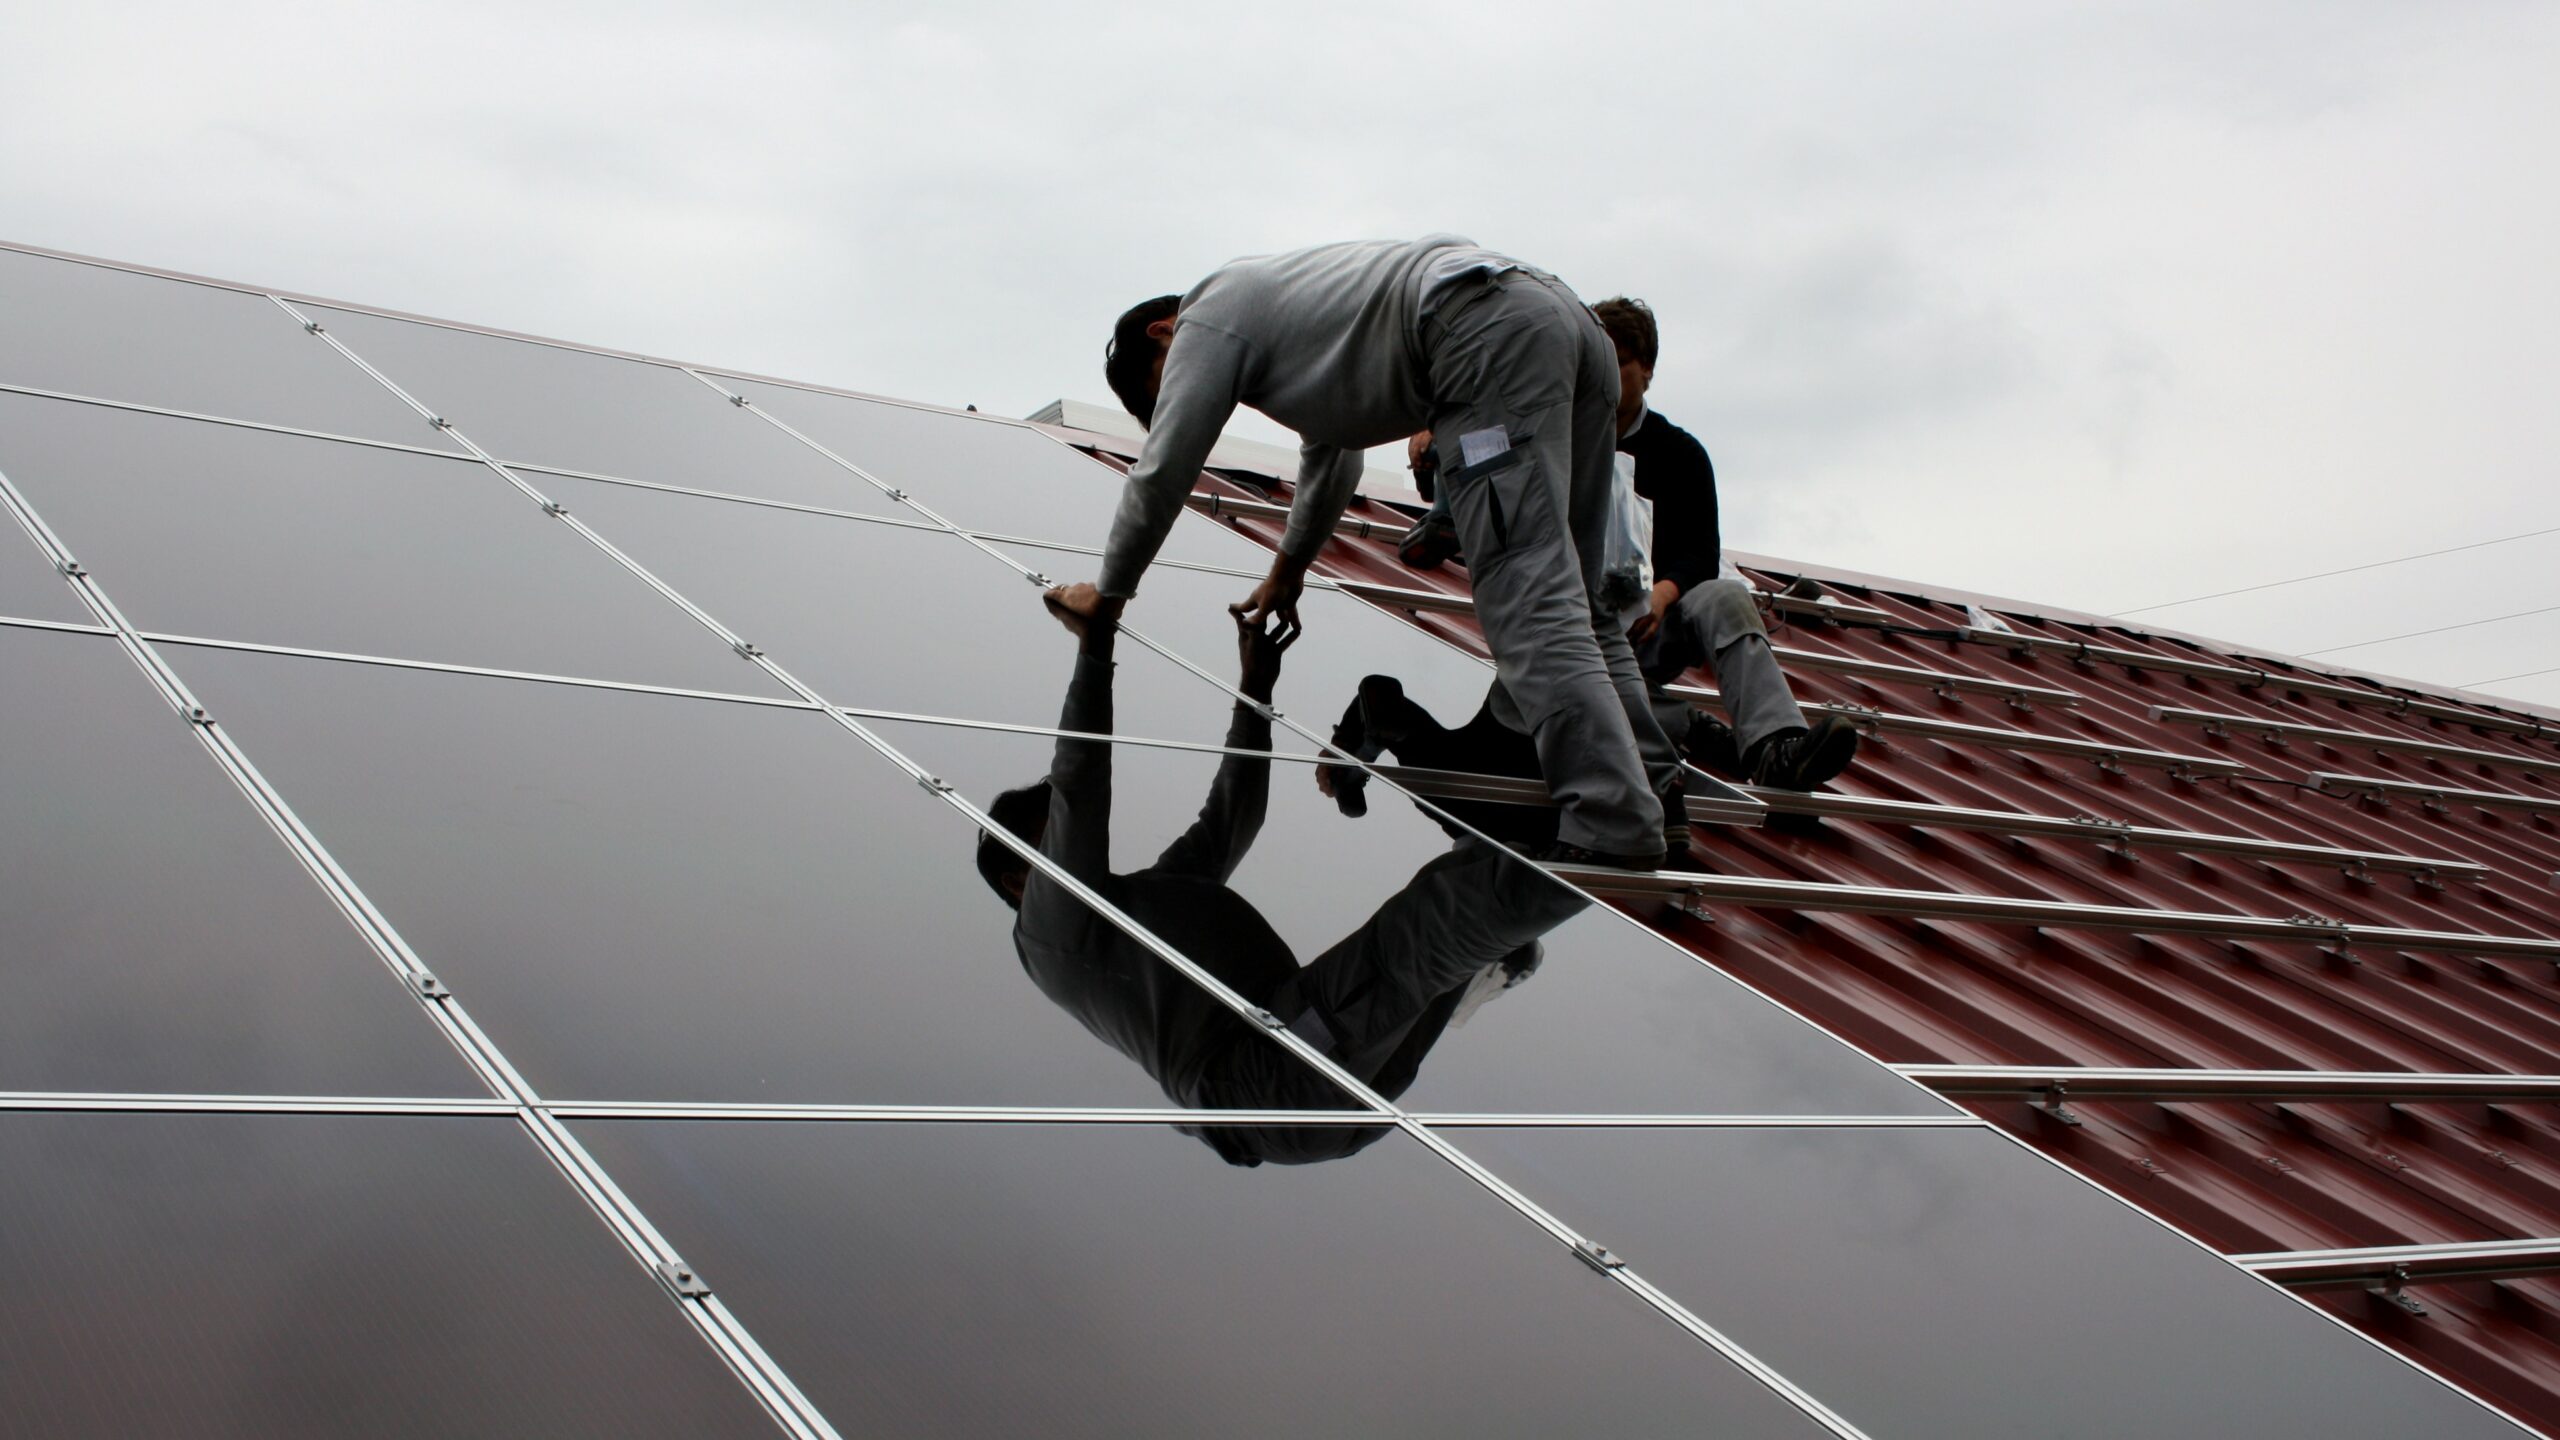 Thin-film solar panels installed on roof